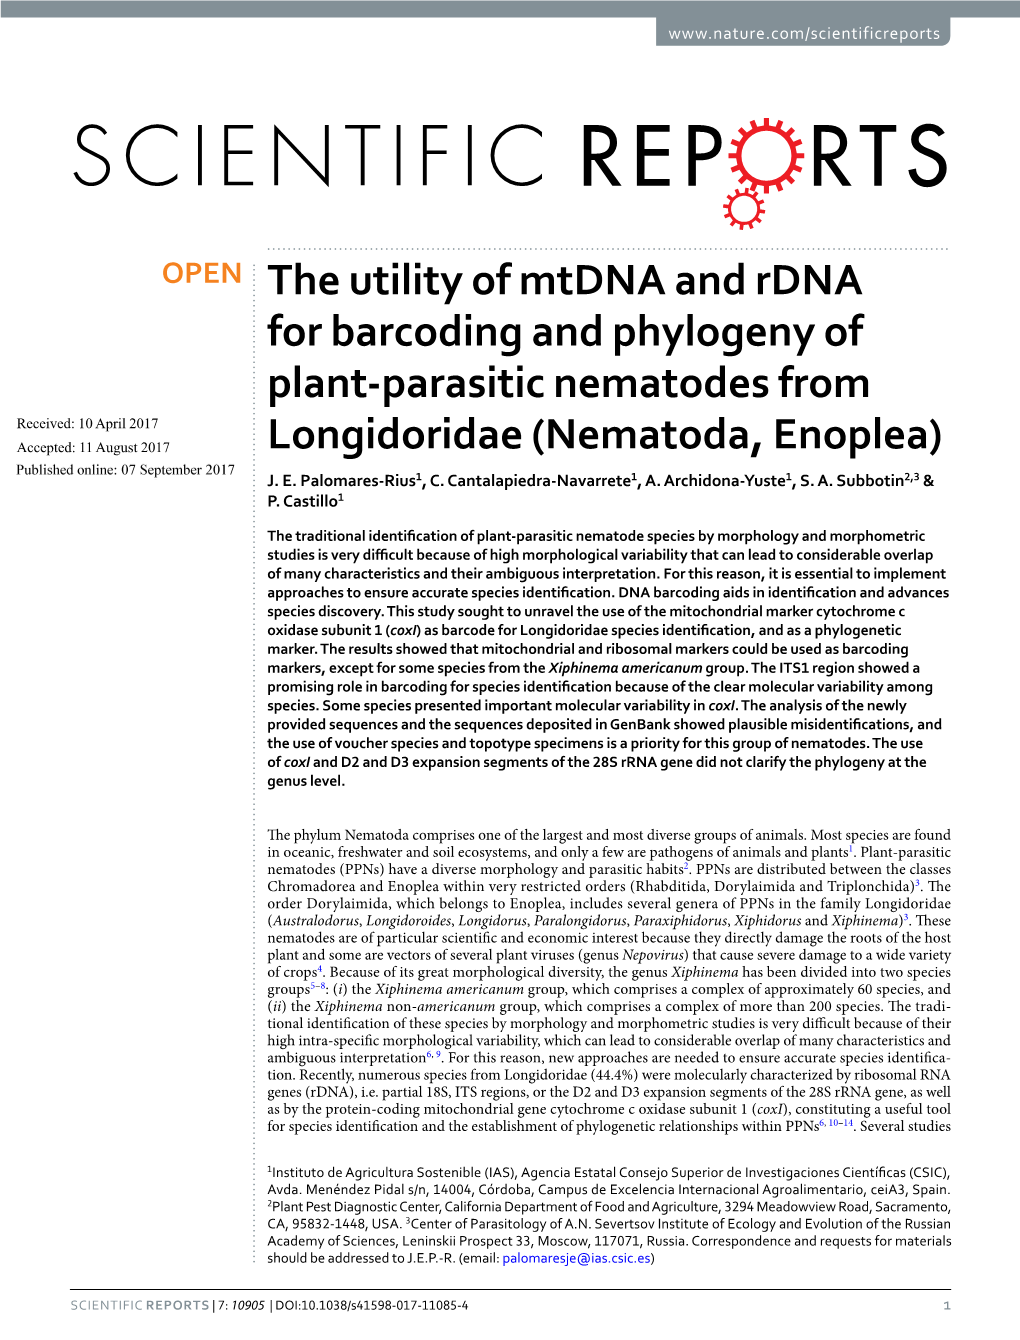 The Utility of Mtdna and Rdna for Barcoding and Phylogeny of Plant